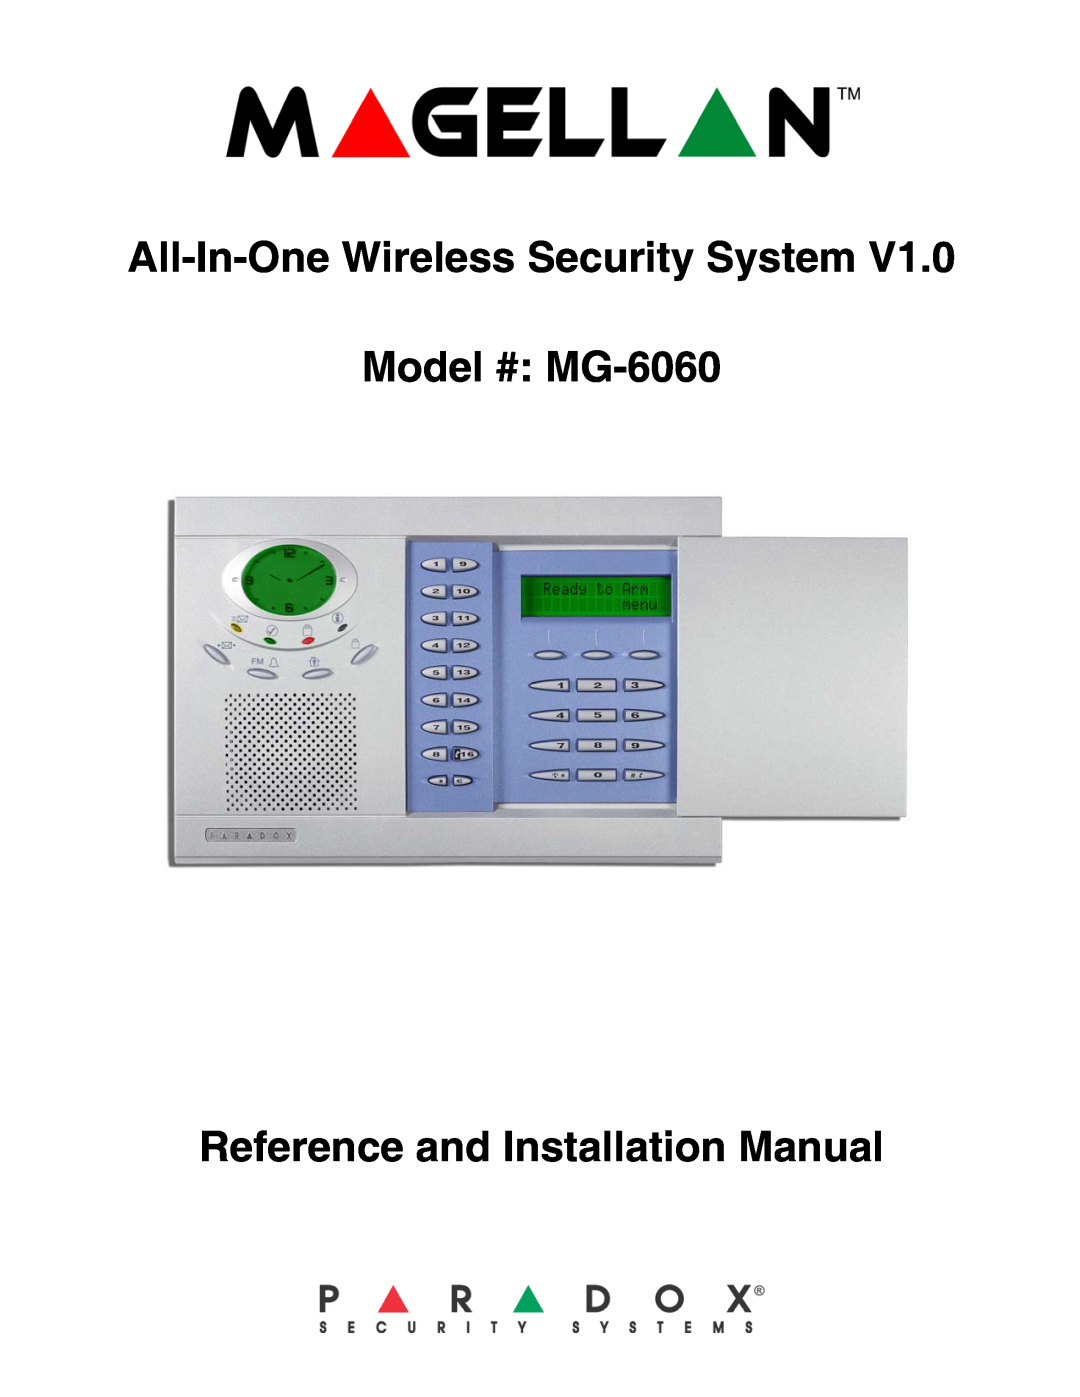 Magellan installation manual All-In-OneWireless Security System, Model # MG-6060, Reference and Installation Manual 